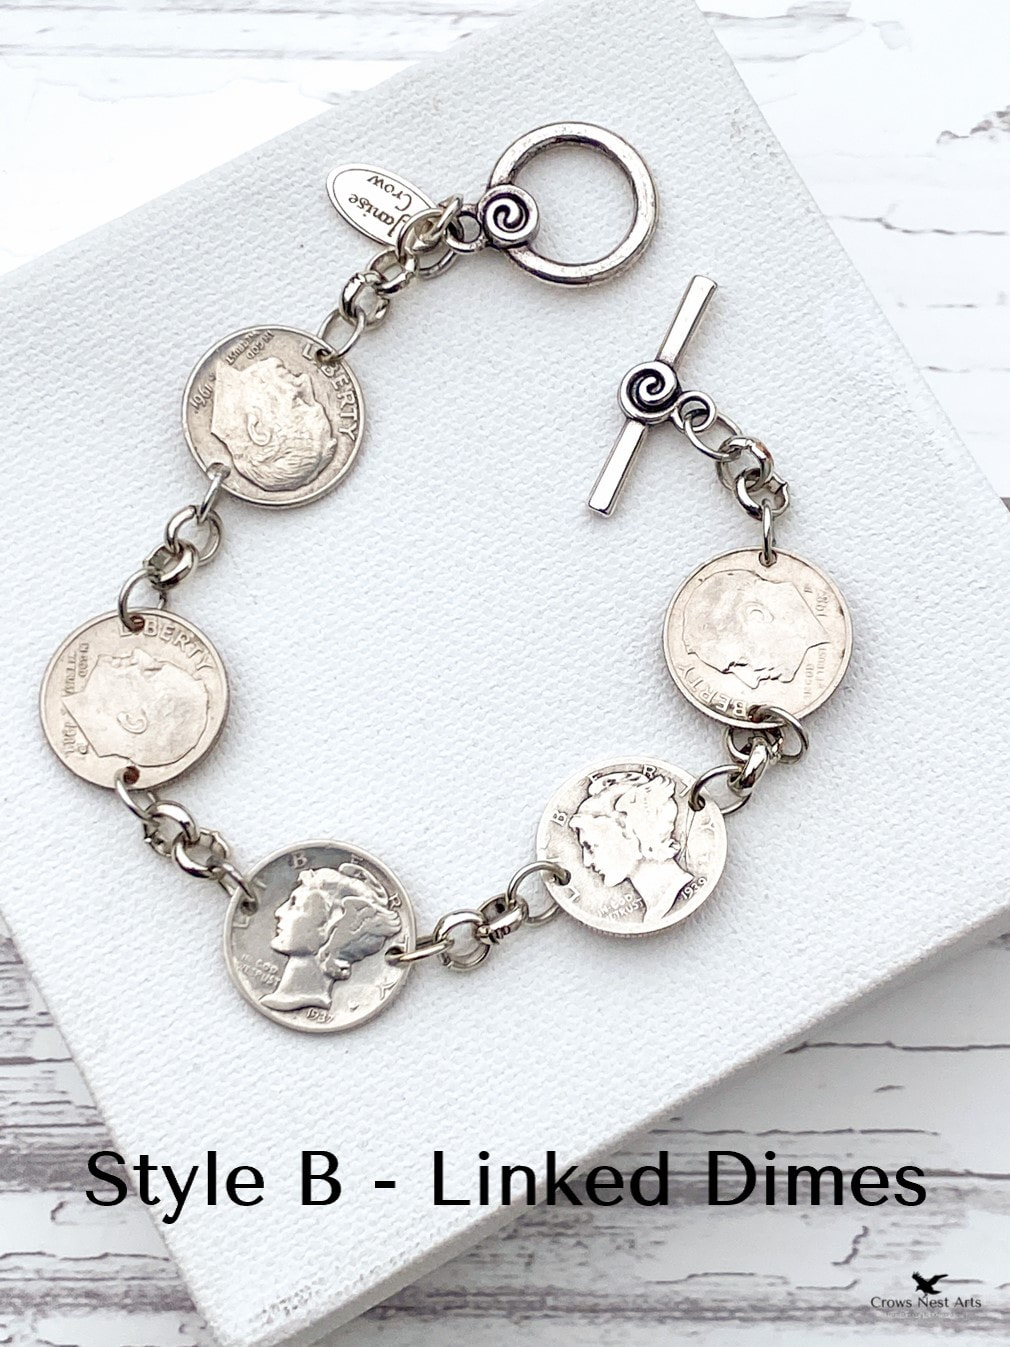 Details about   1950 STERLING SILVER DIME COIN BRACELET 71st BIRTHDAY GIFT PICK BIRTHSTONE CHARM 